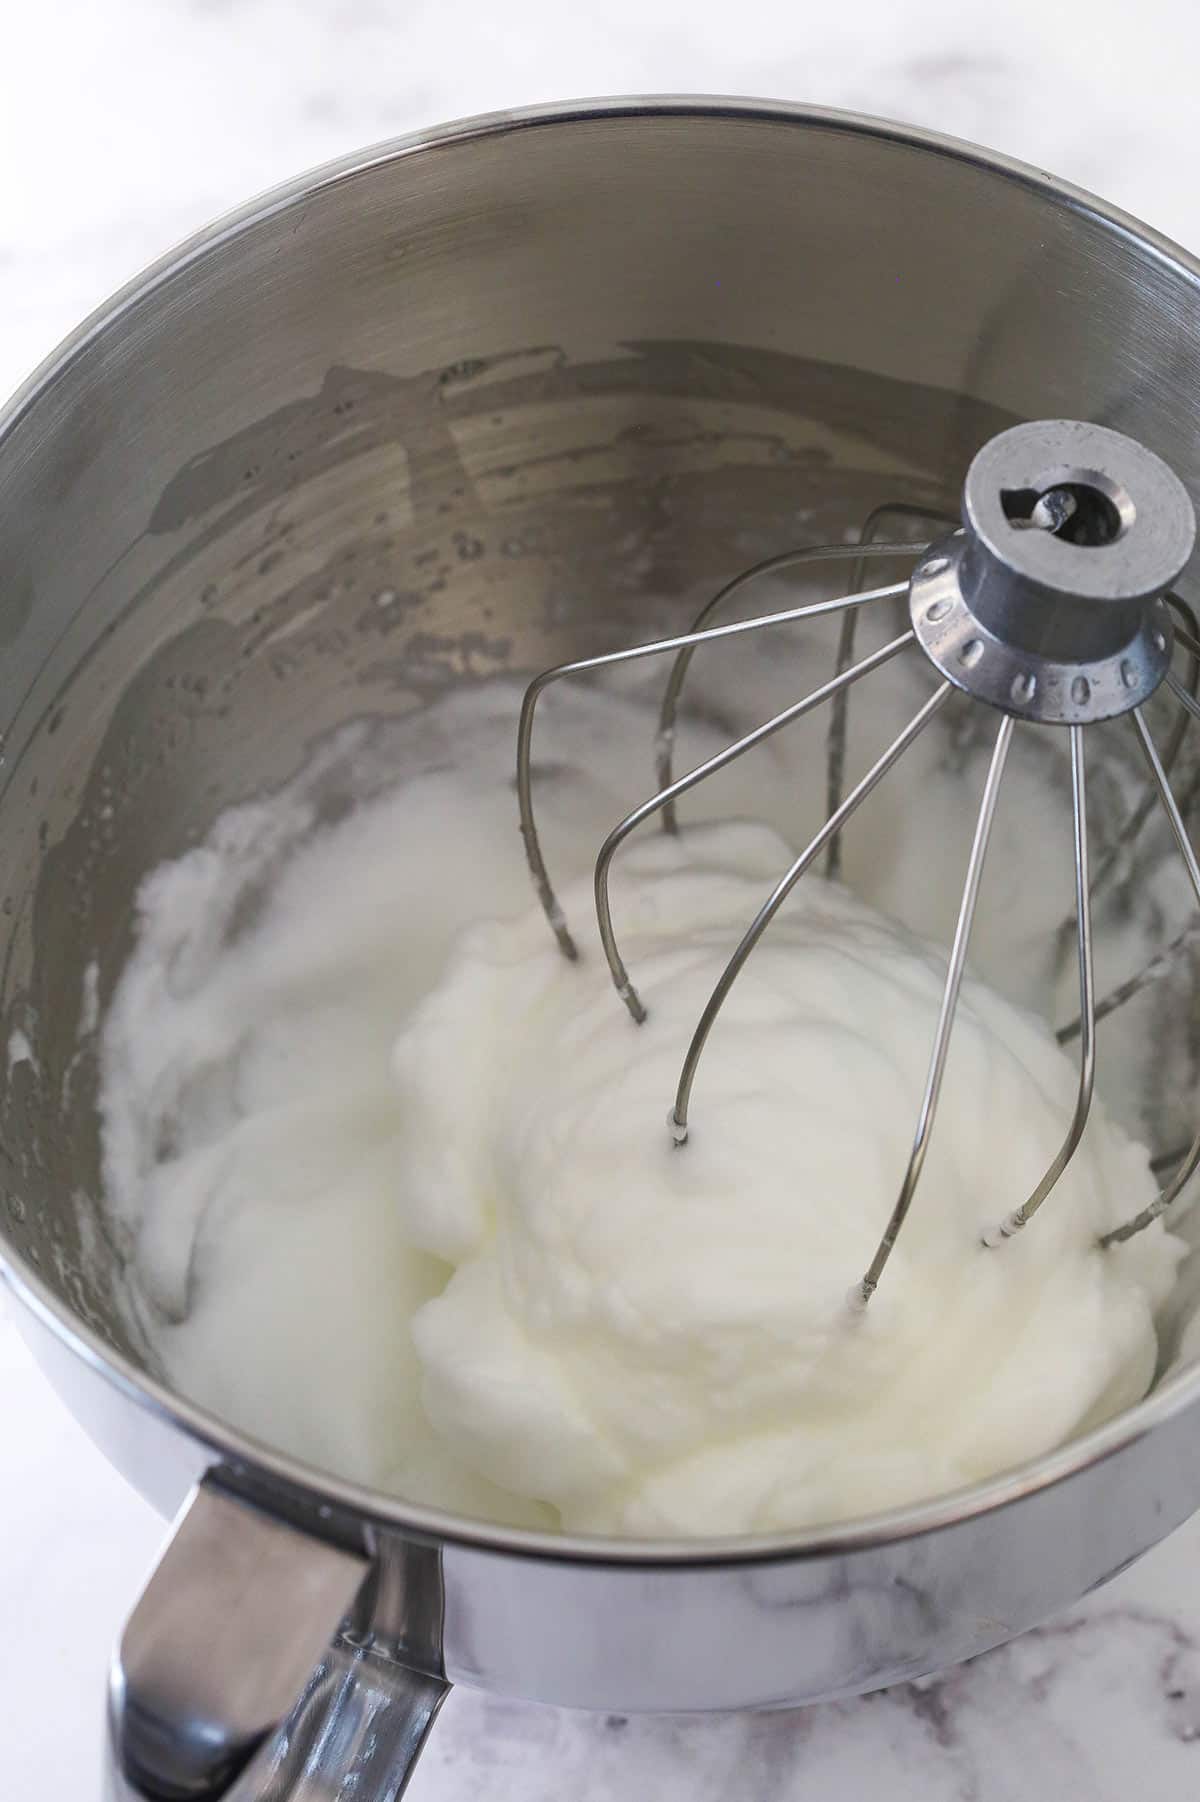 Whipping egg whites for conversation heart cupcakes.